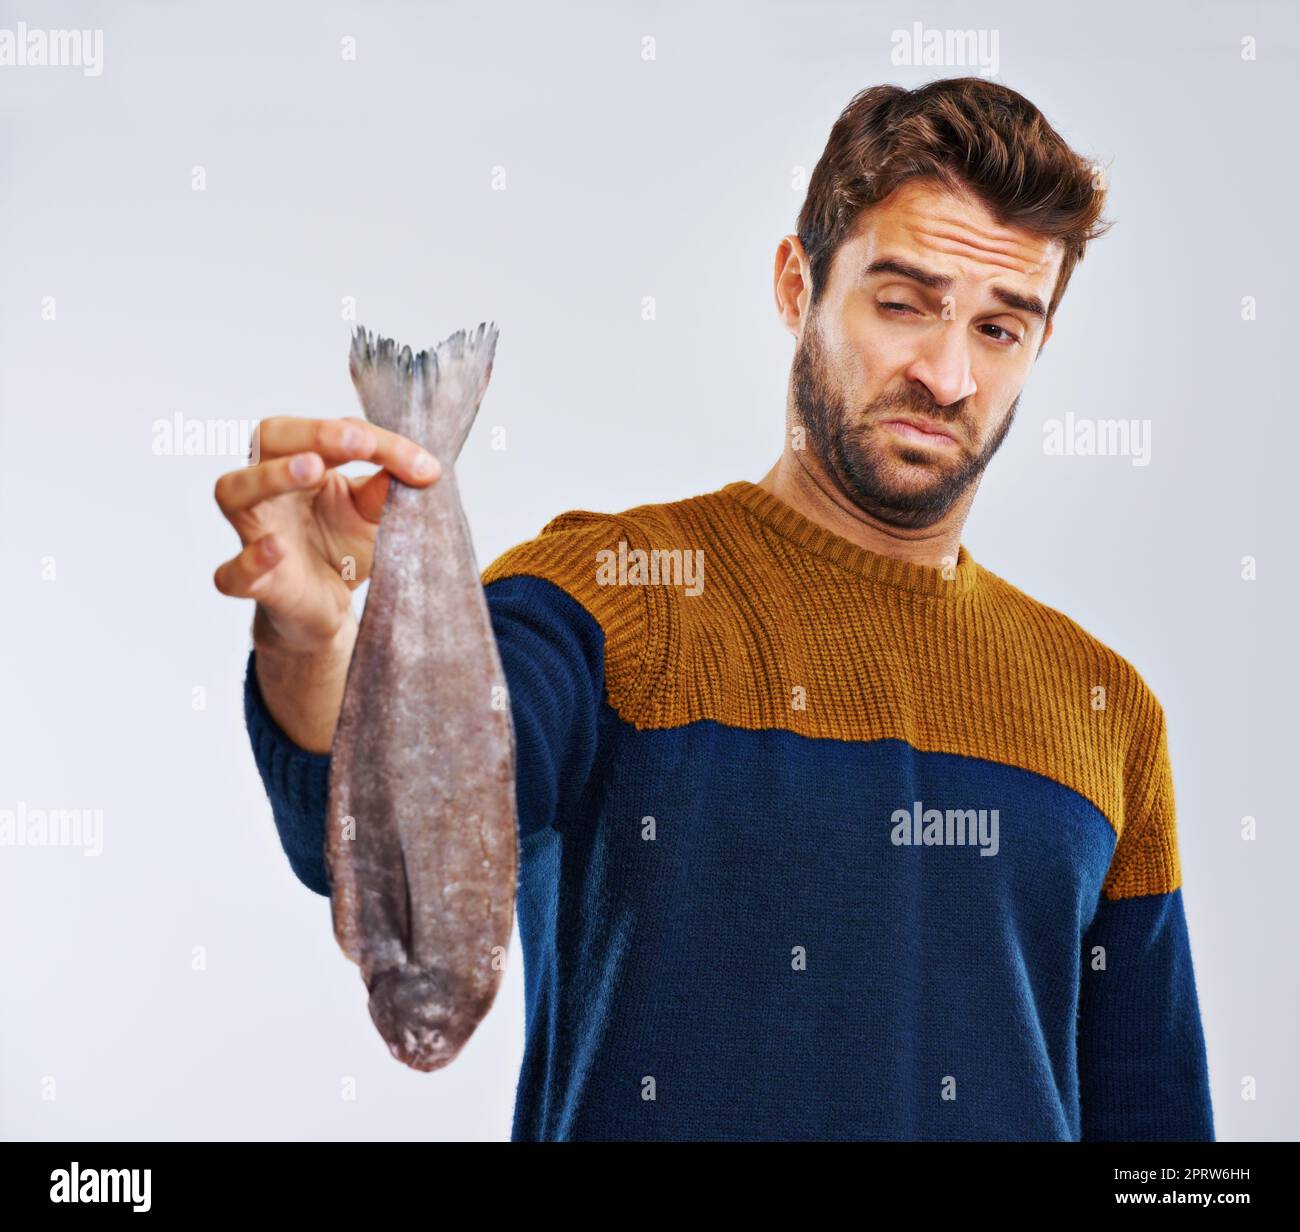 Theres something fishy going on here. Studio shot of a man showing disgust while holding a smelly fish. Stock Photo